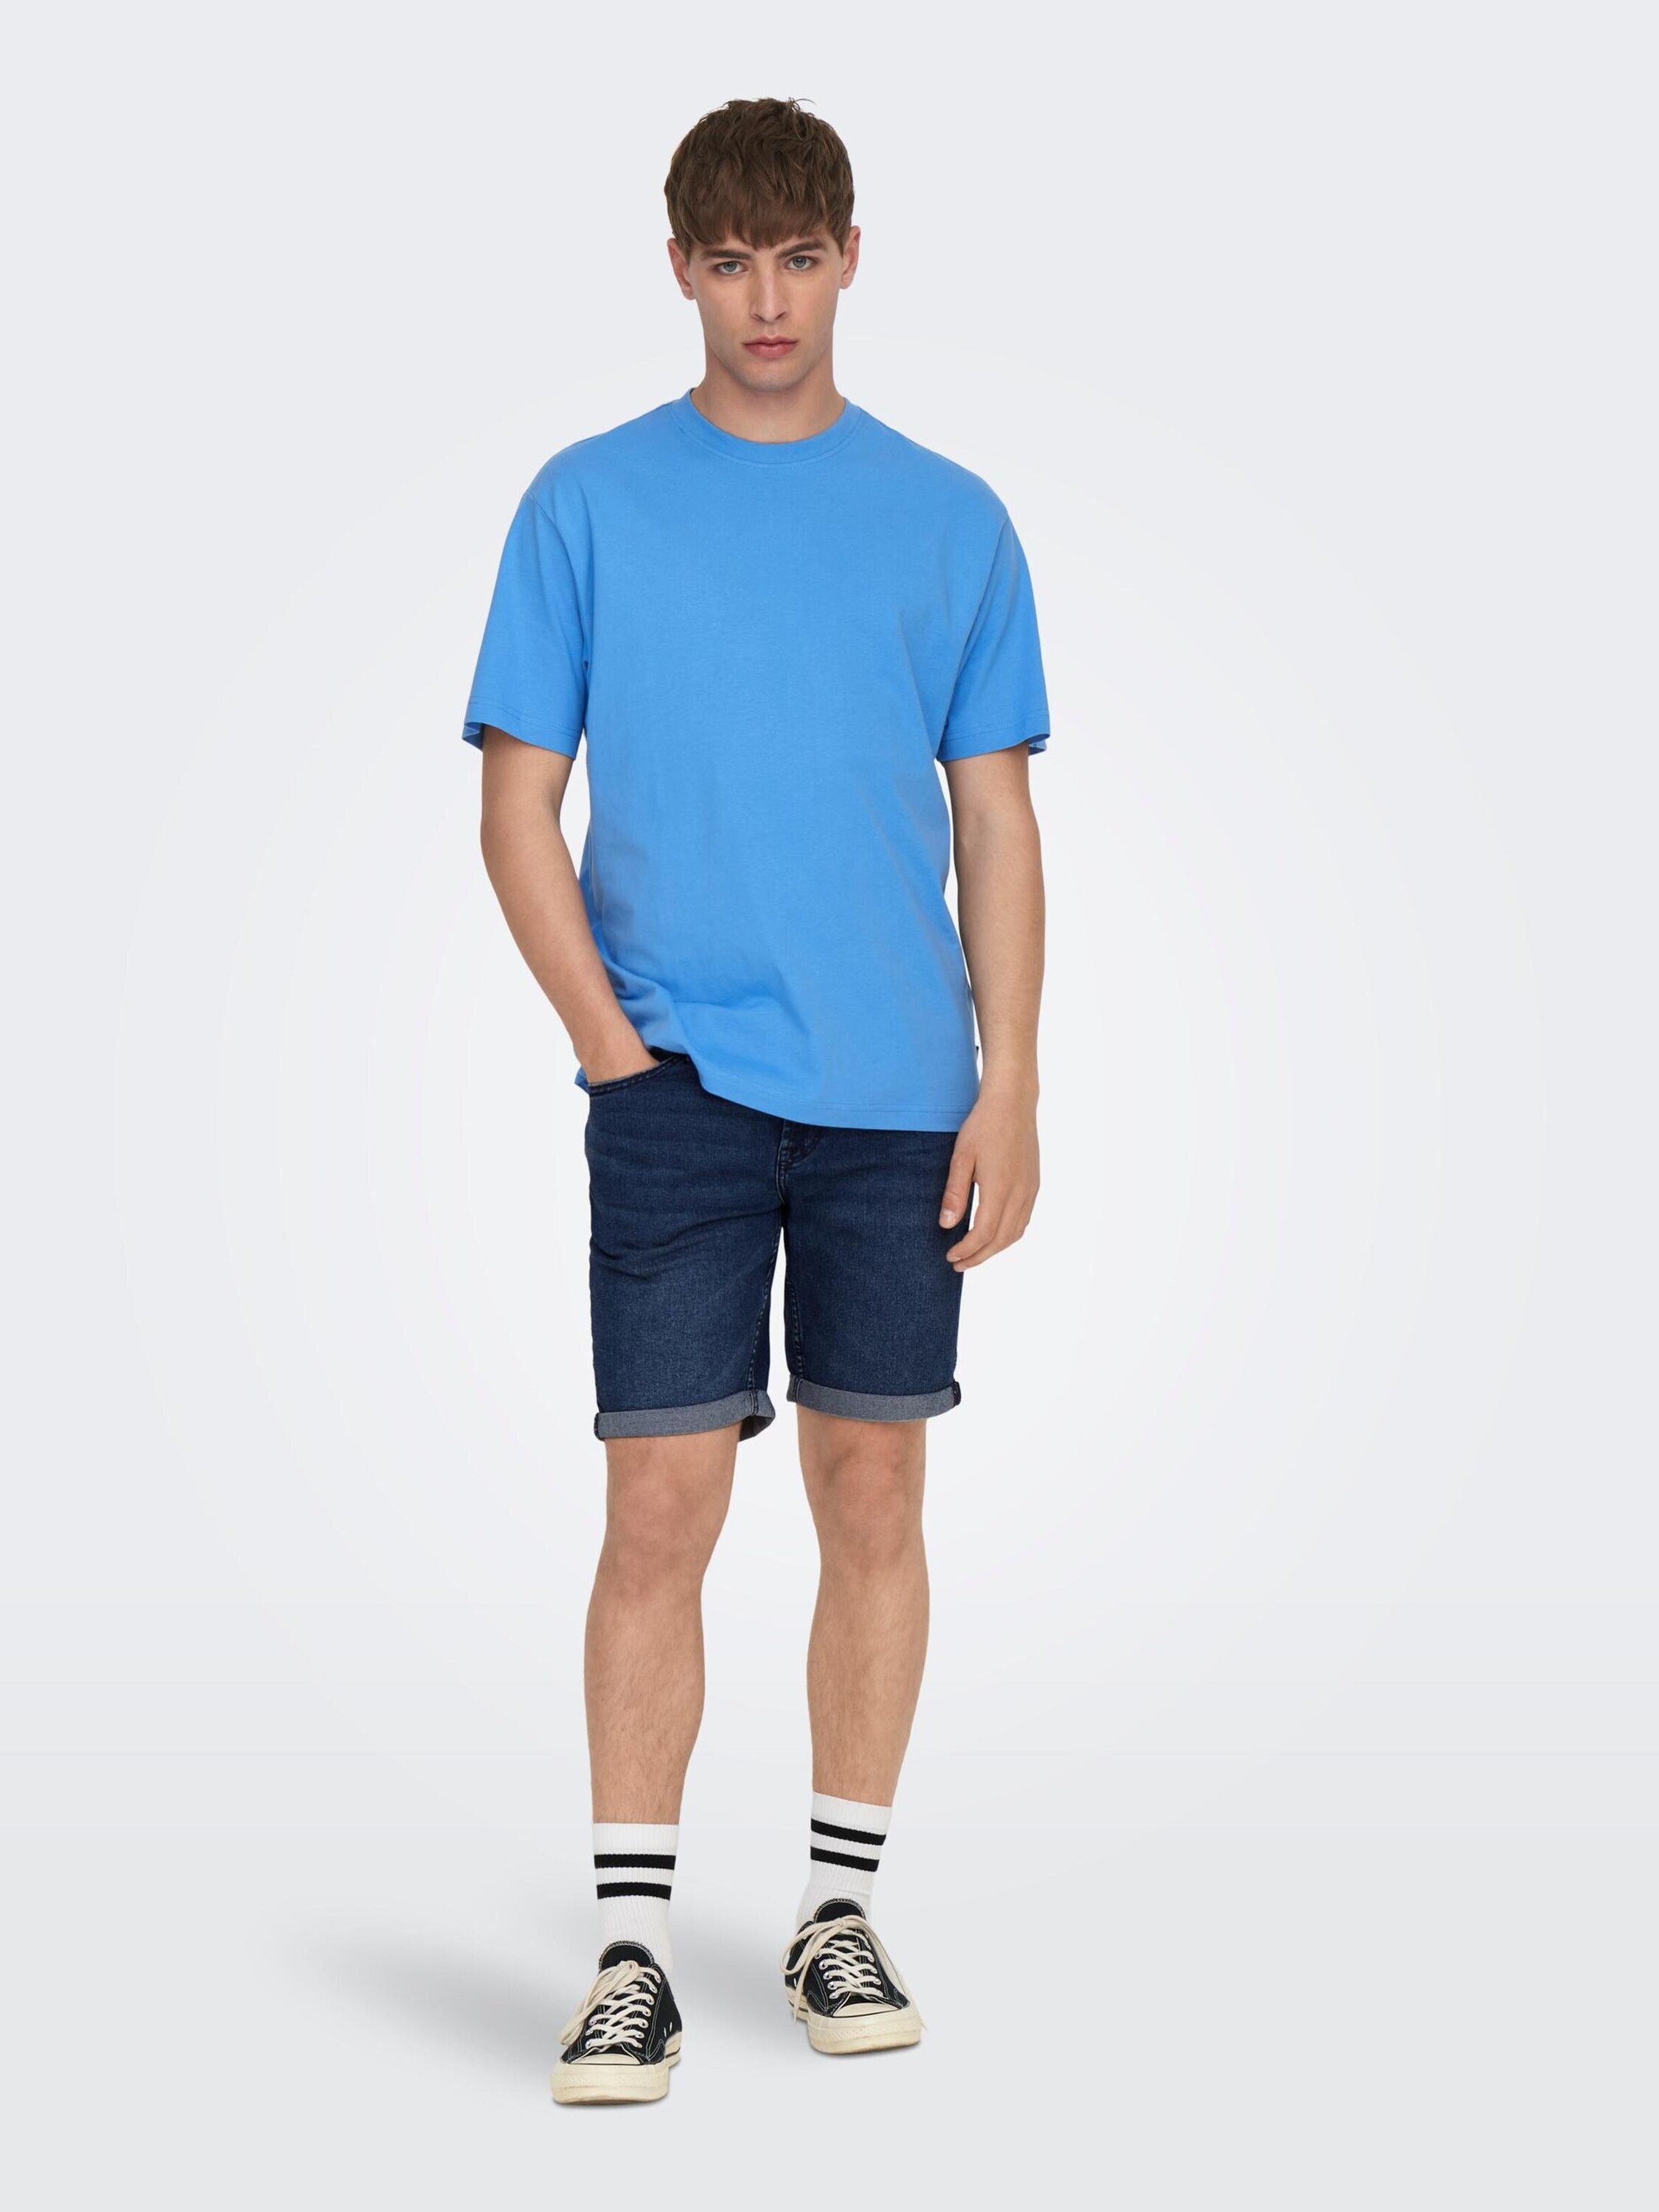 SONS ONLY & Jeansshorts Ply (1-tlg)